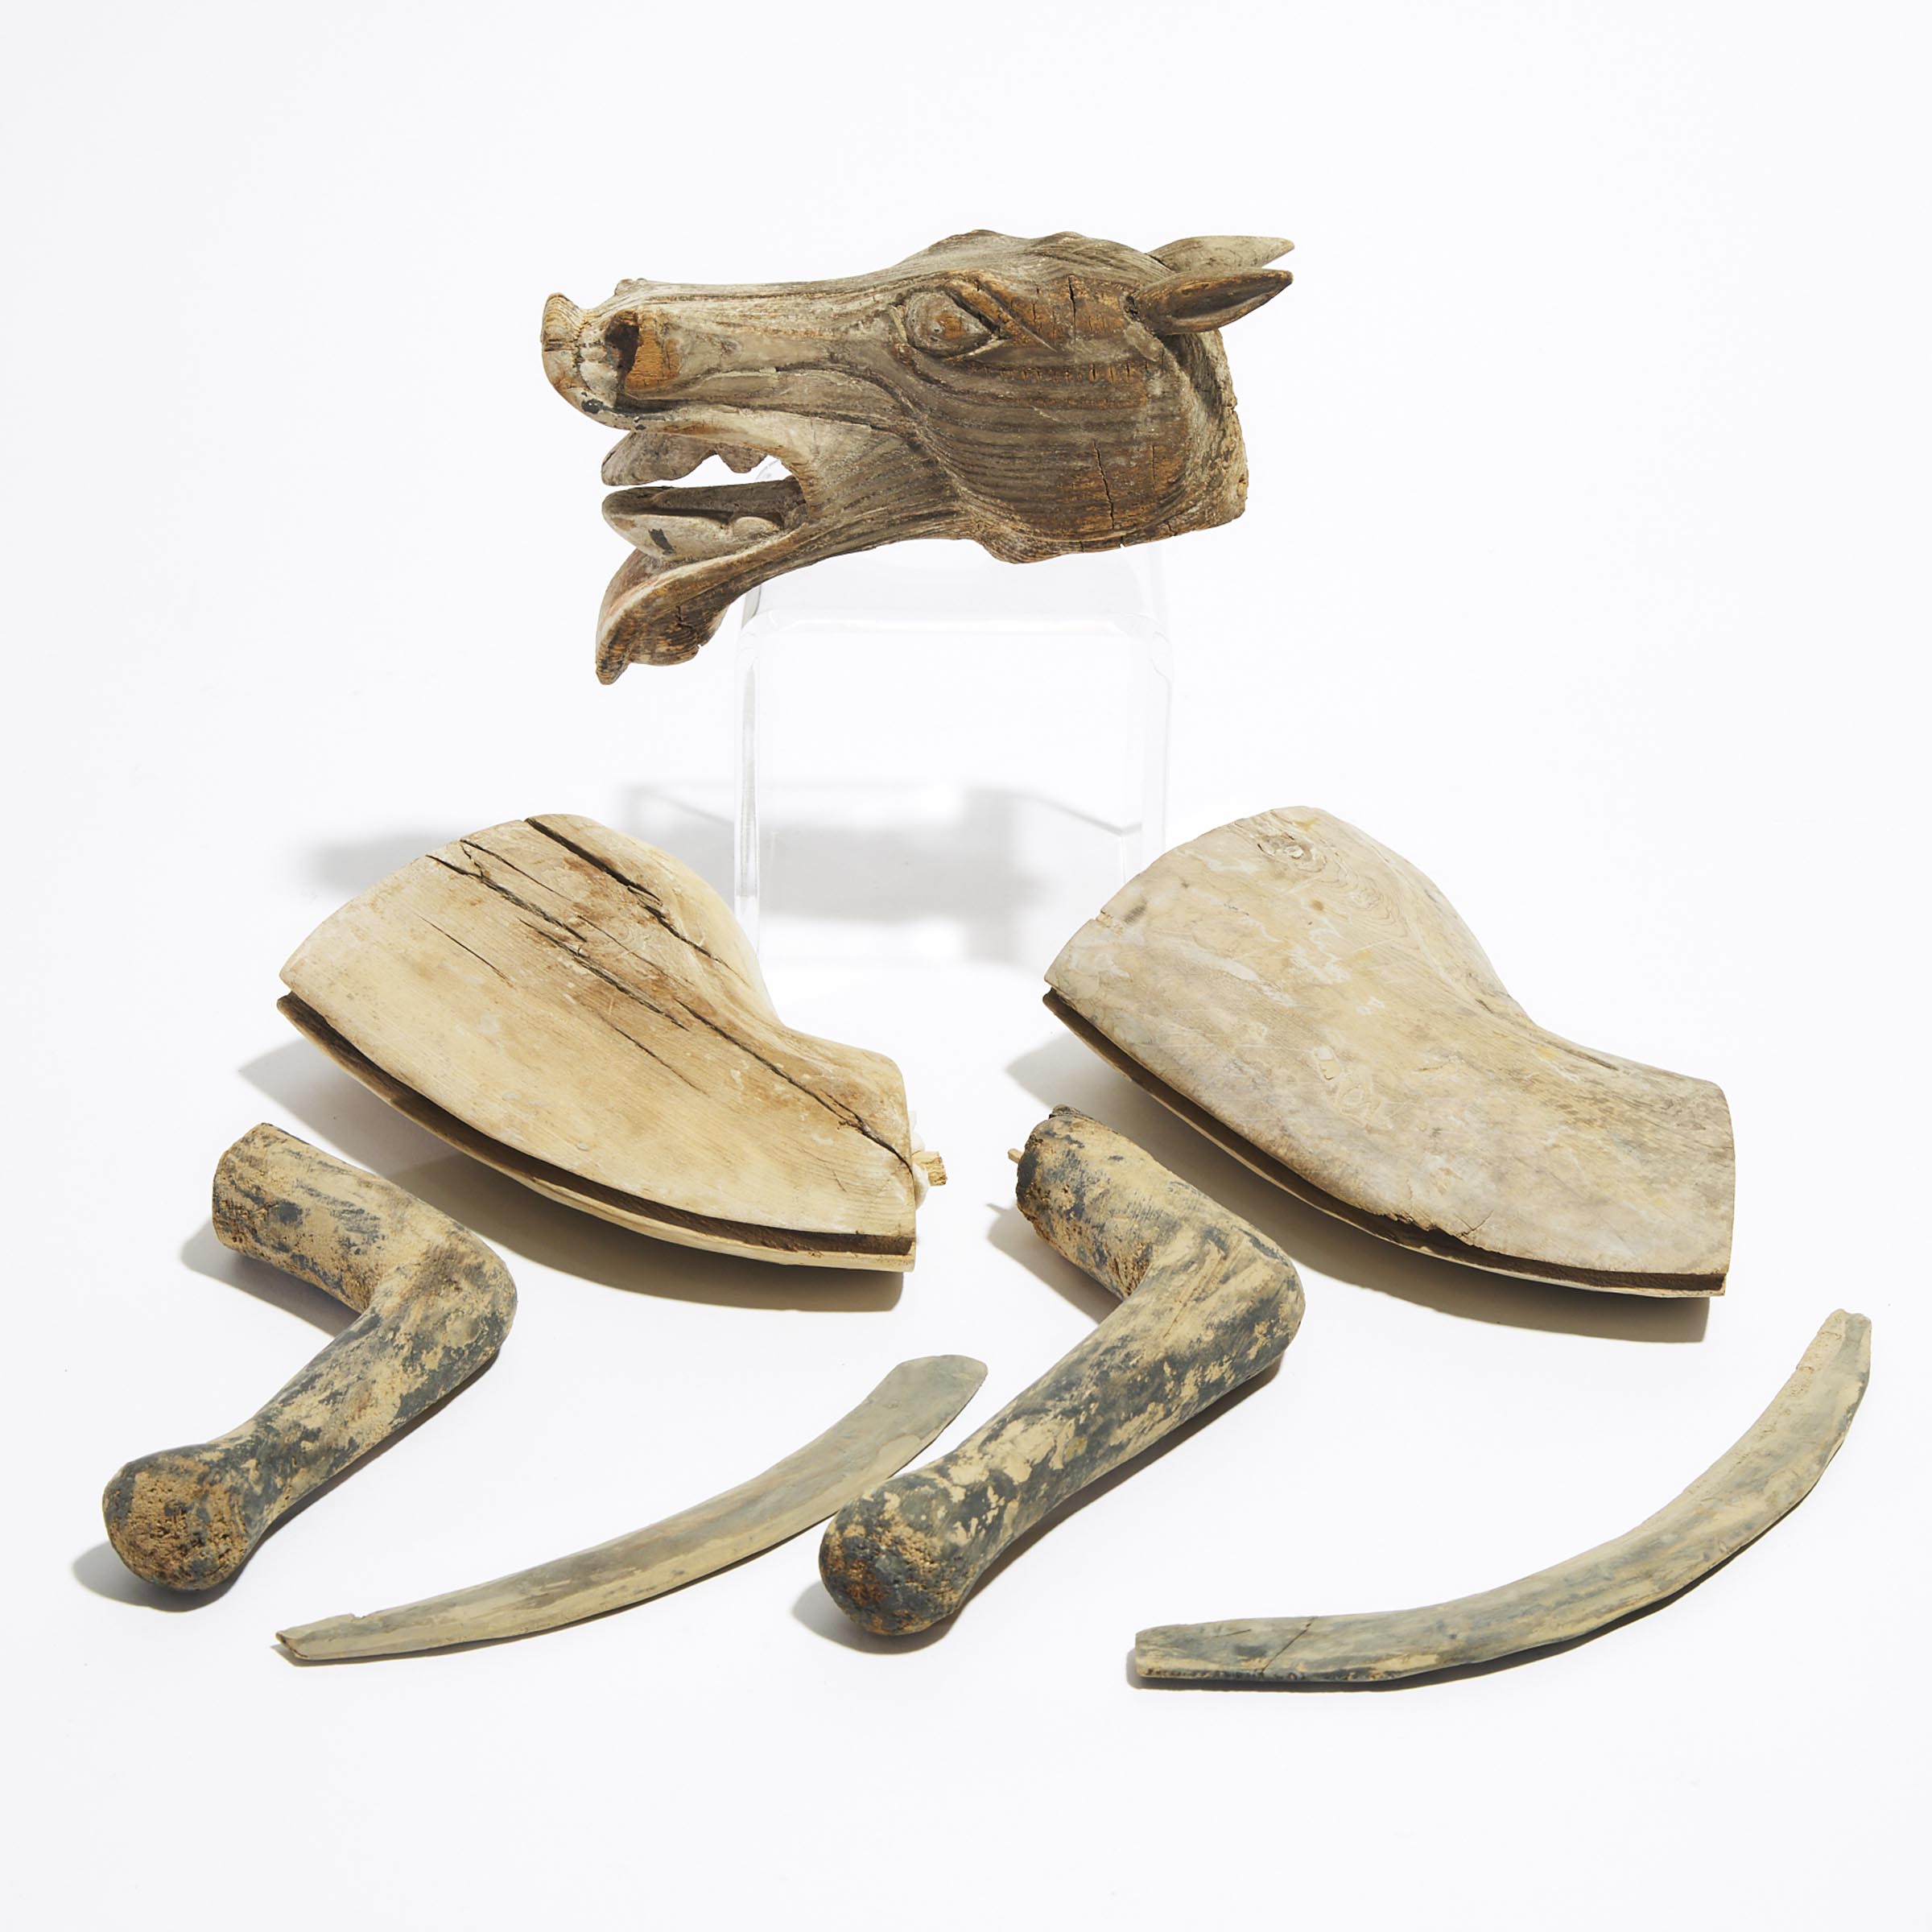 A Wood Horse Head, Together With Six Body Parts, Han Dynasty (206 BC - AD 220)